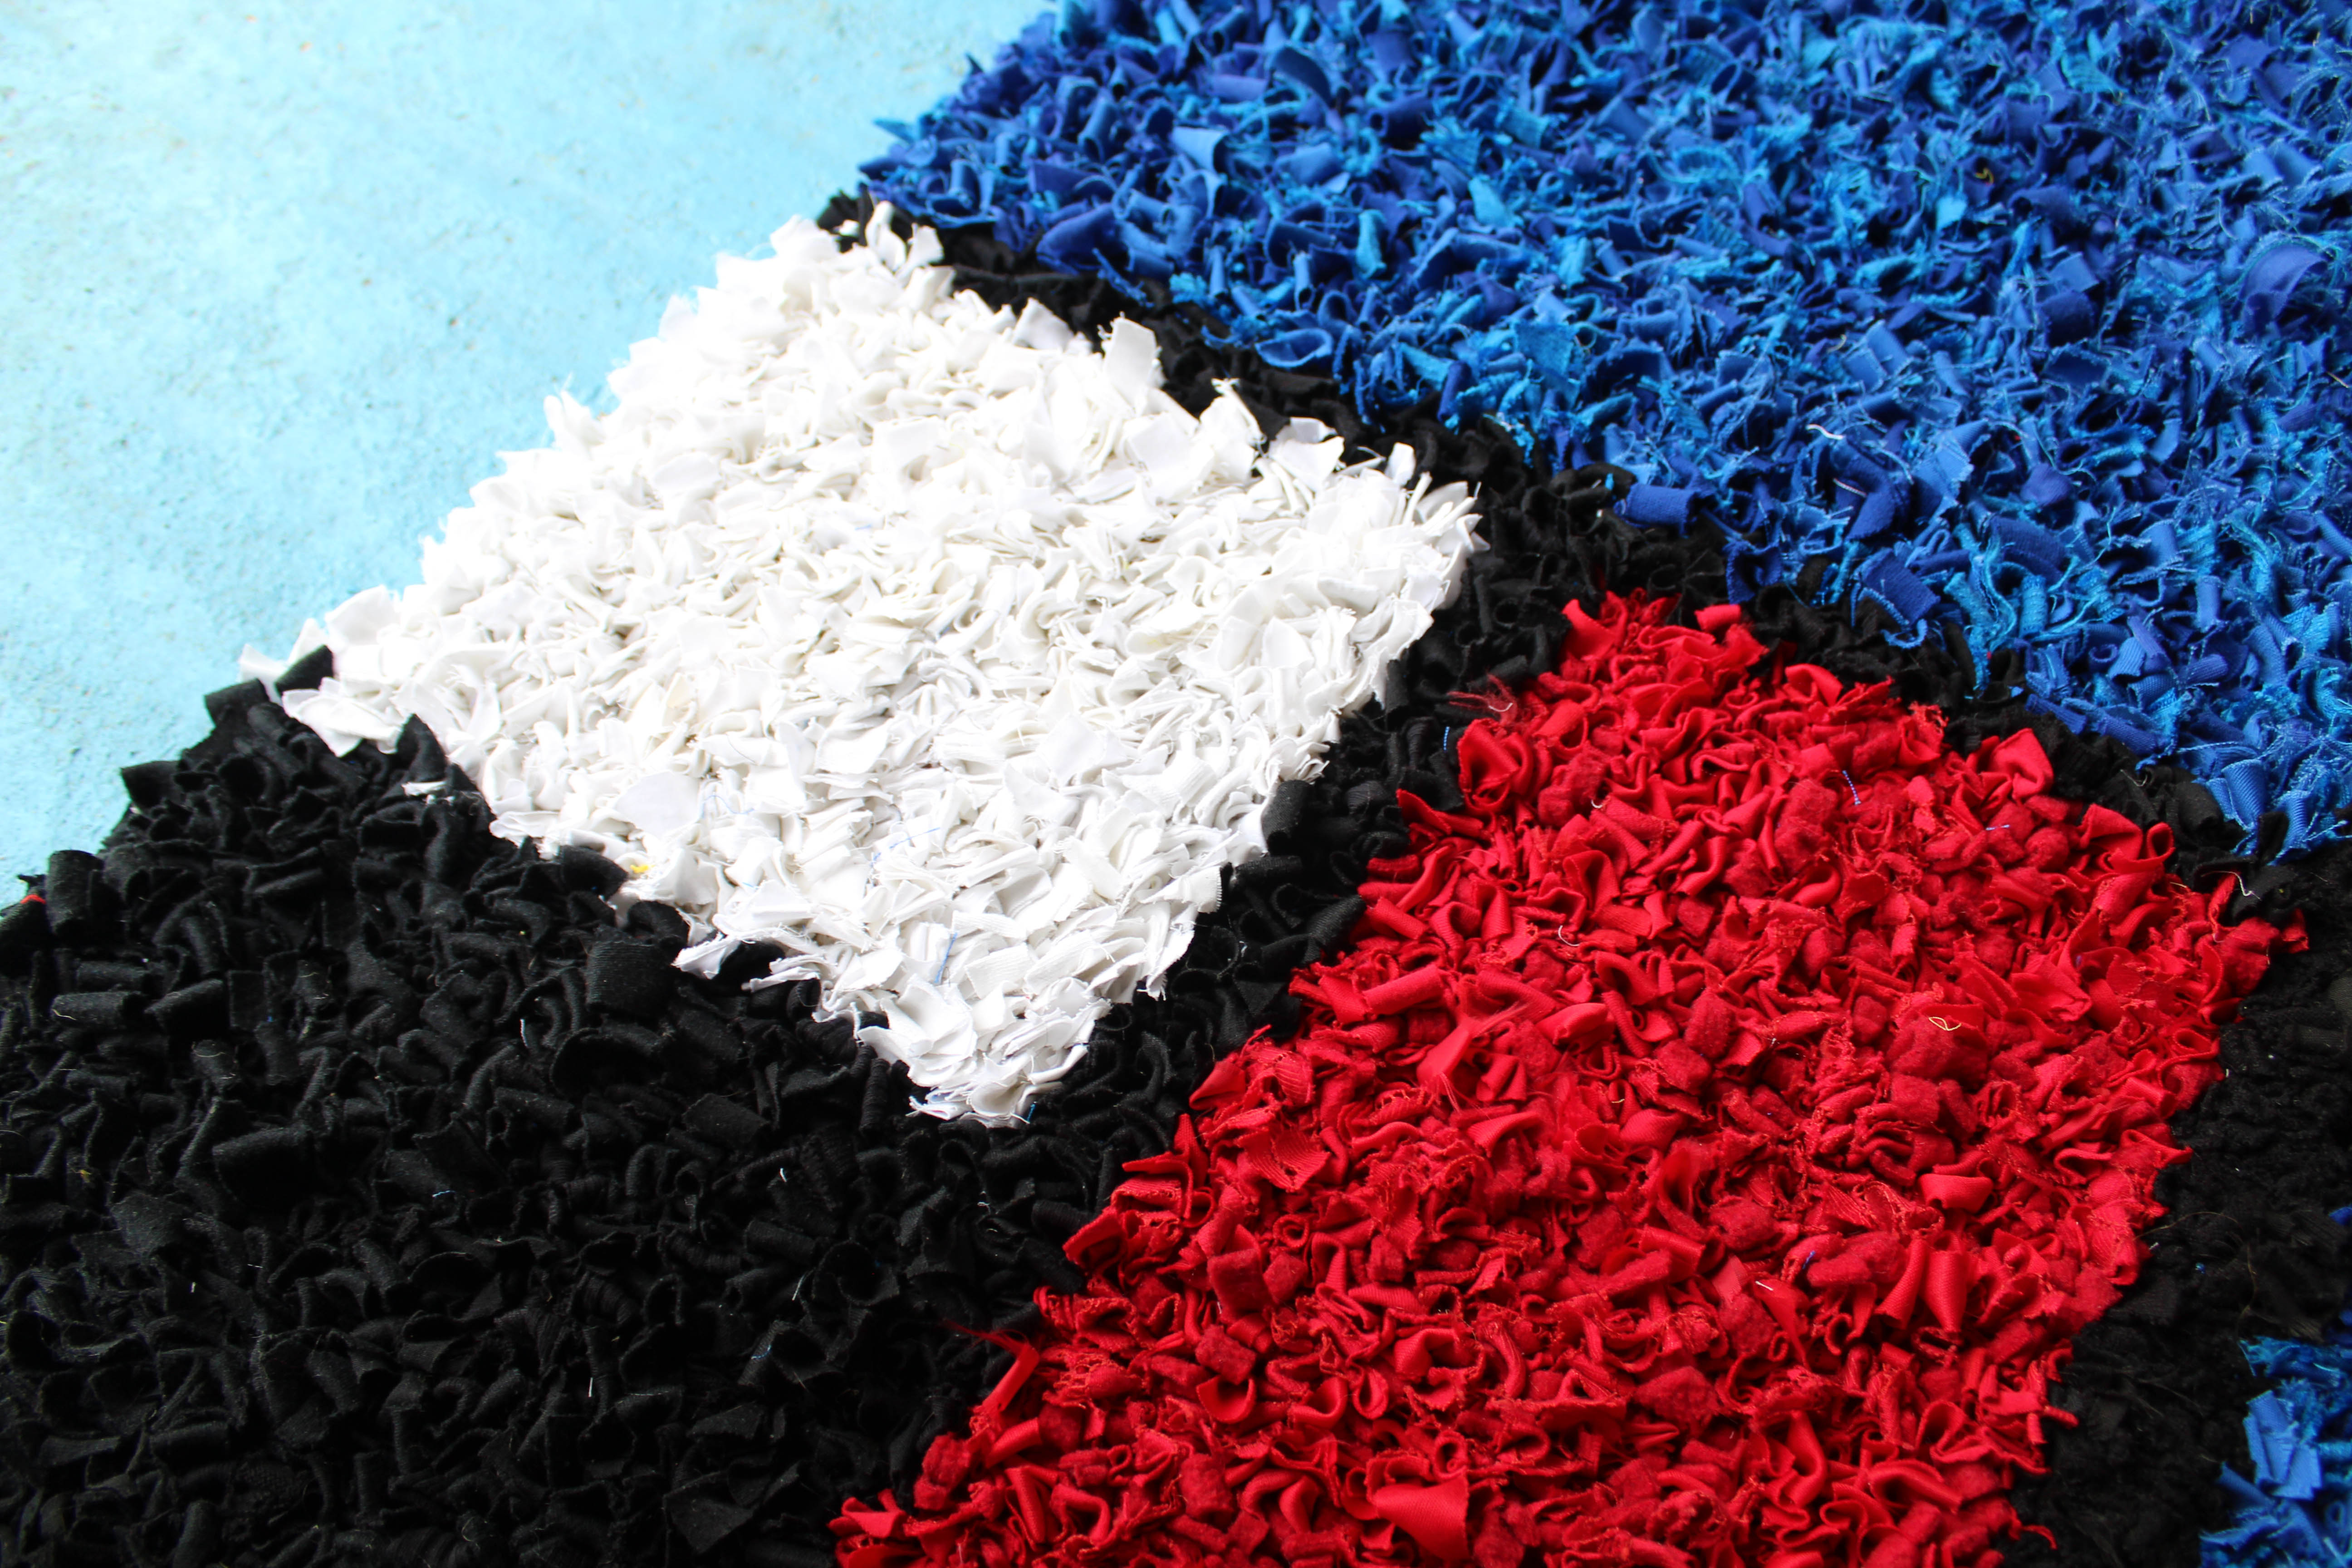 Section of our Mondrian inspired rag rug. Blue, red, white and black blocks of colour woven together in the short shaggy technique of rag rugging. 